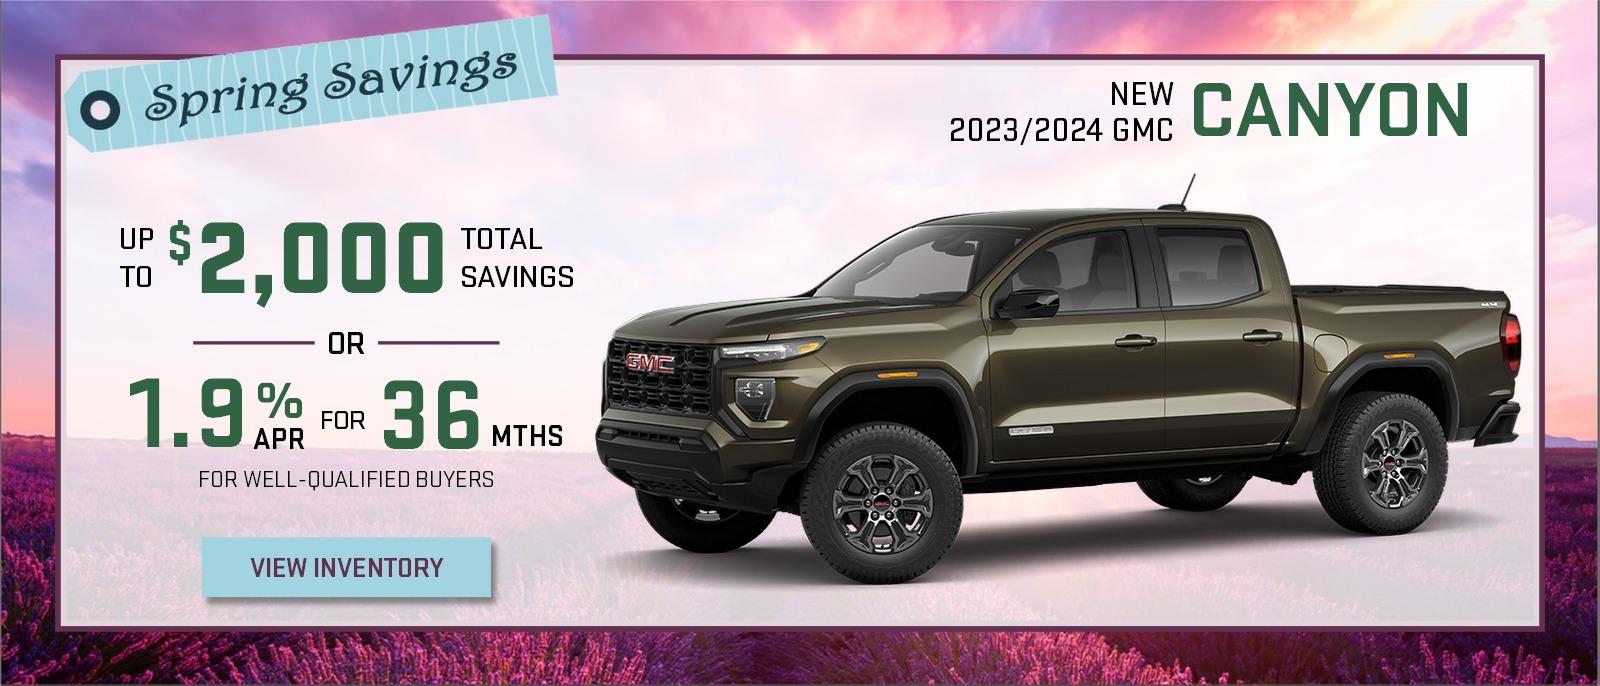 Spring Savings
New 2024 GMC Yukon/XL
up to $2,000 total savings
or
1.9% APR for 36 months for well-qualified buyers
View Inventory